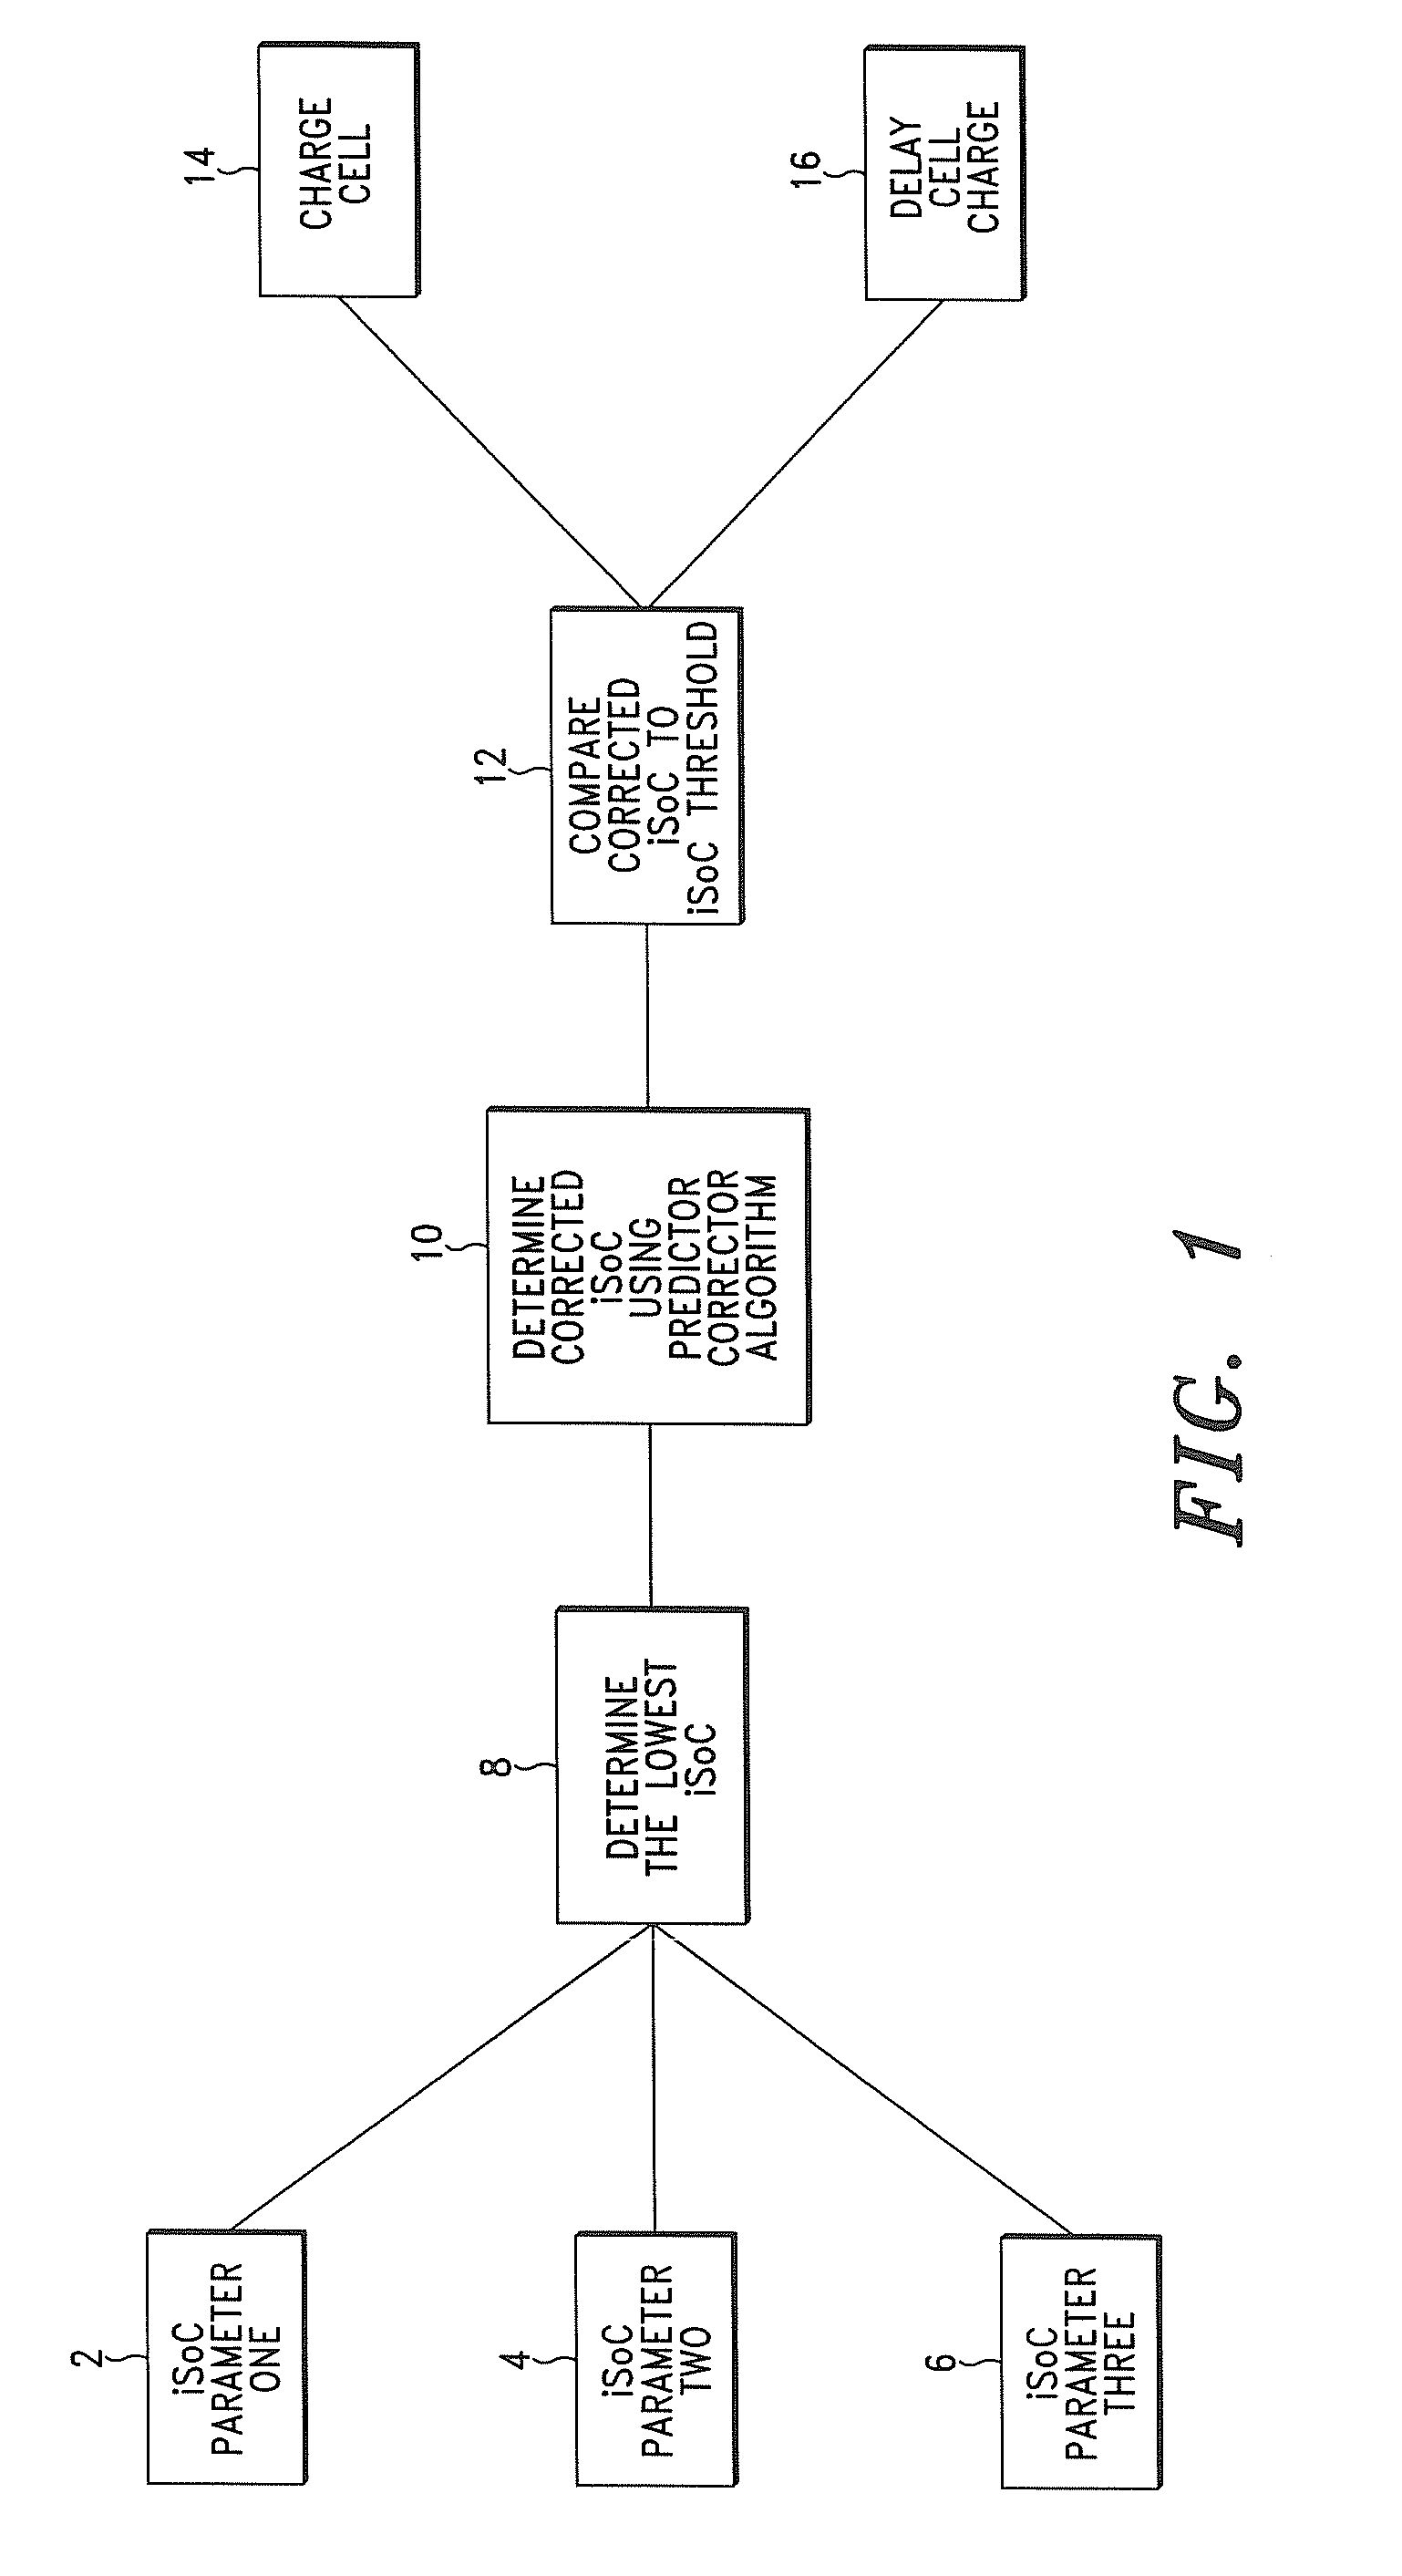 Methods and Systems for Determining the Initial State of Charge (iSoC) and Optimum Charge Cycle(S) and Parameters for a Cell